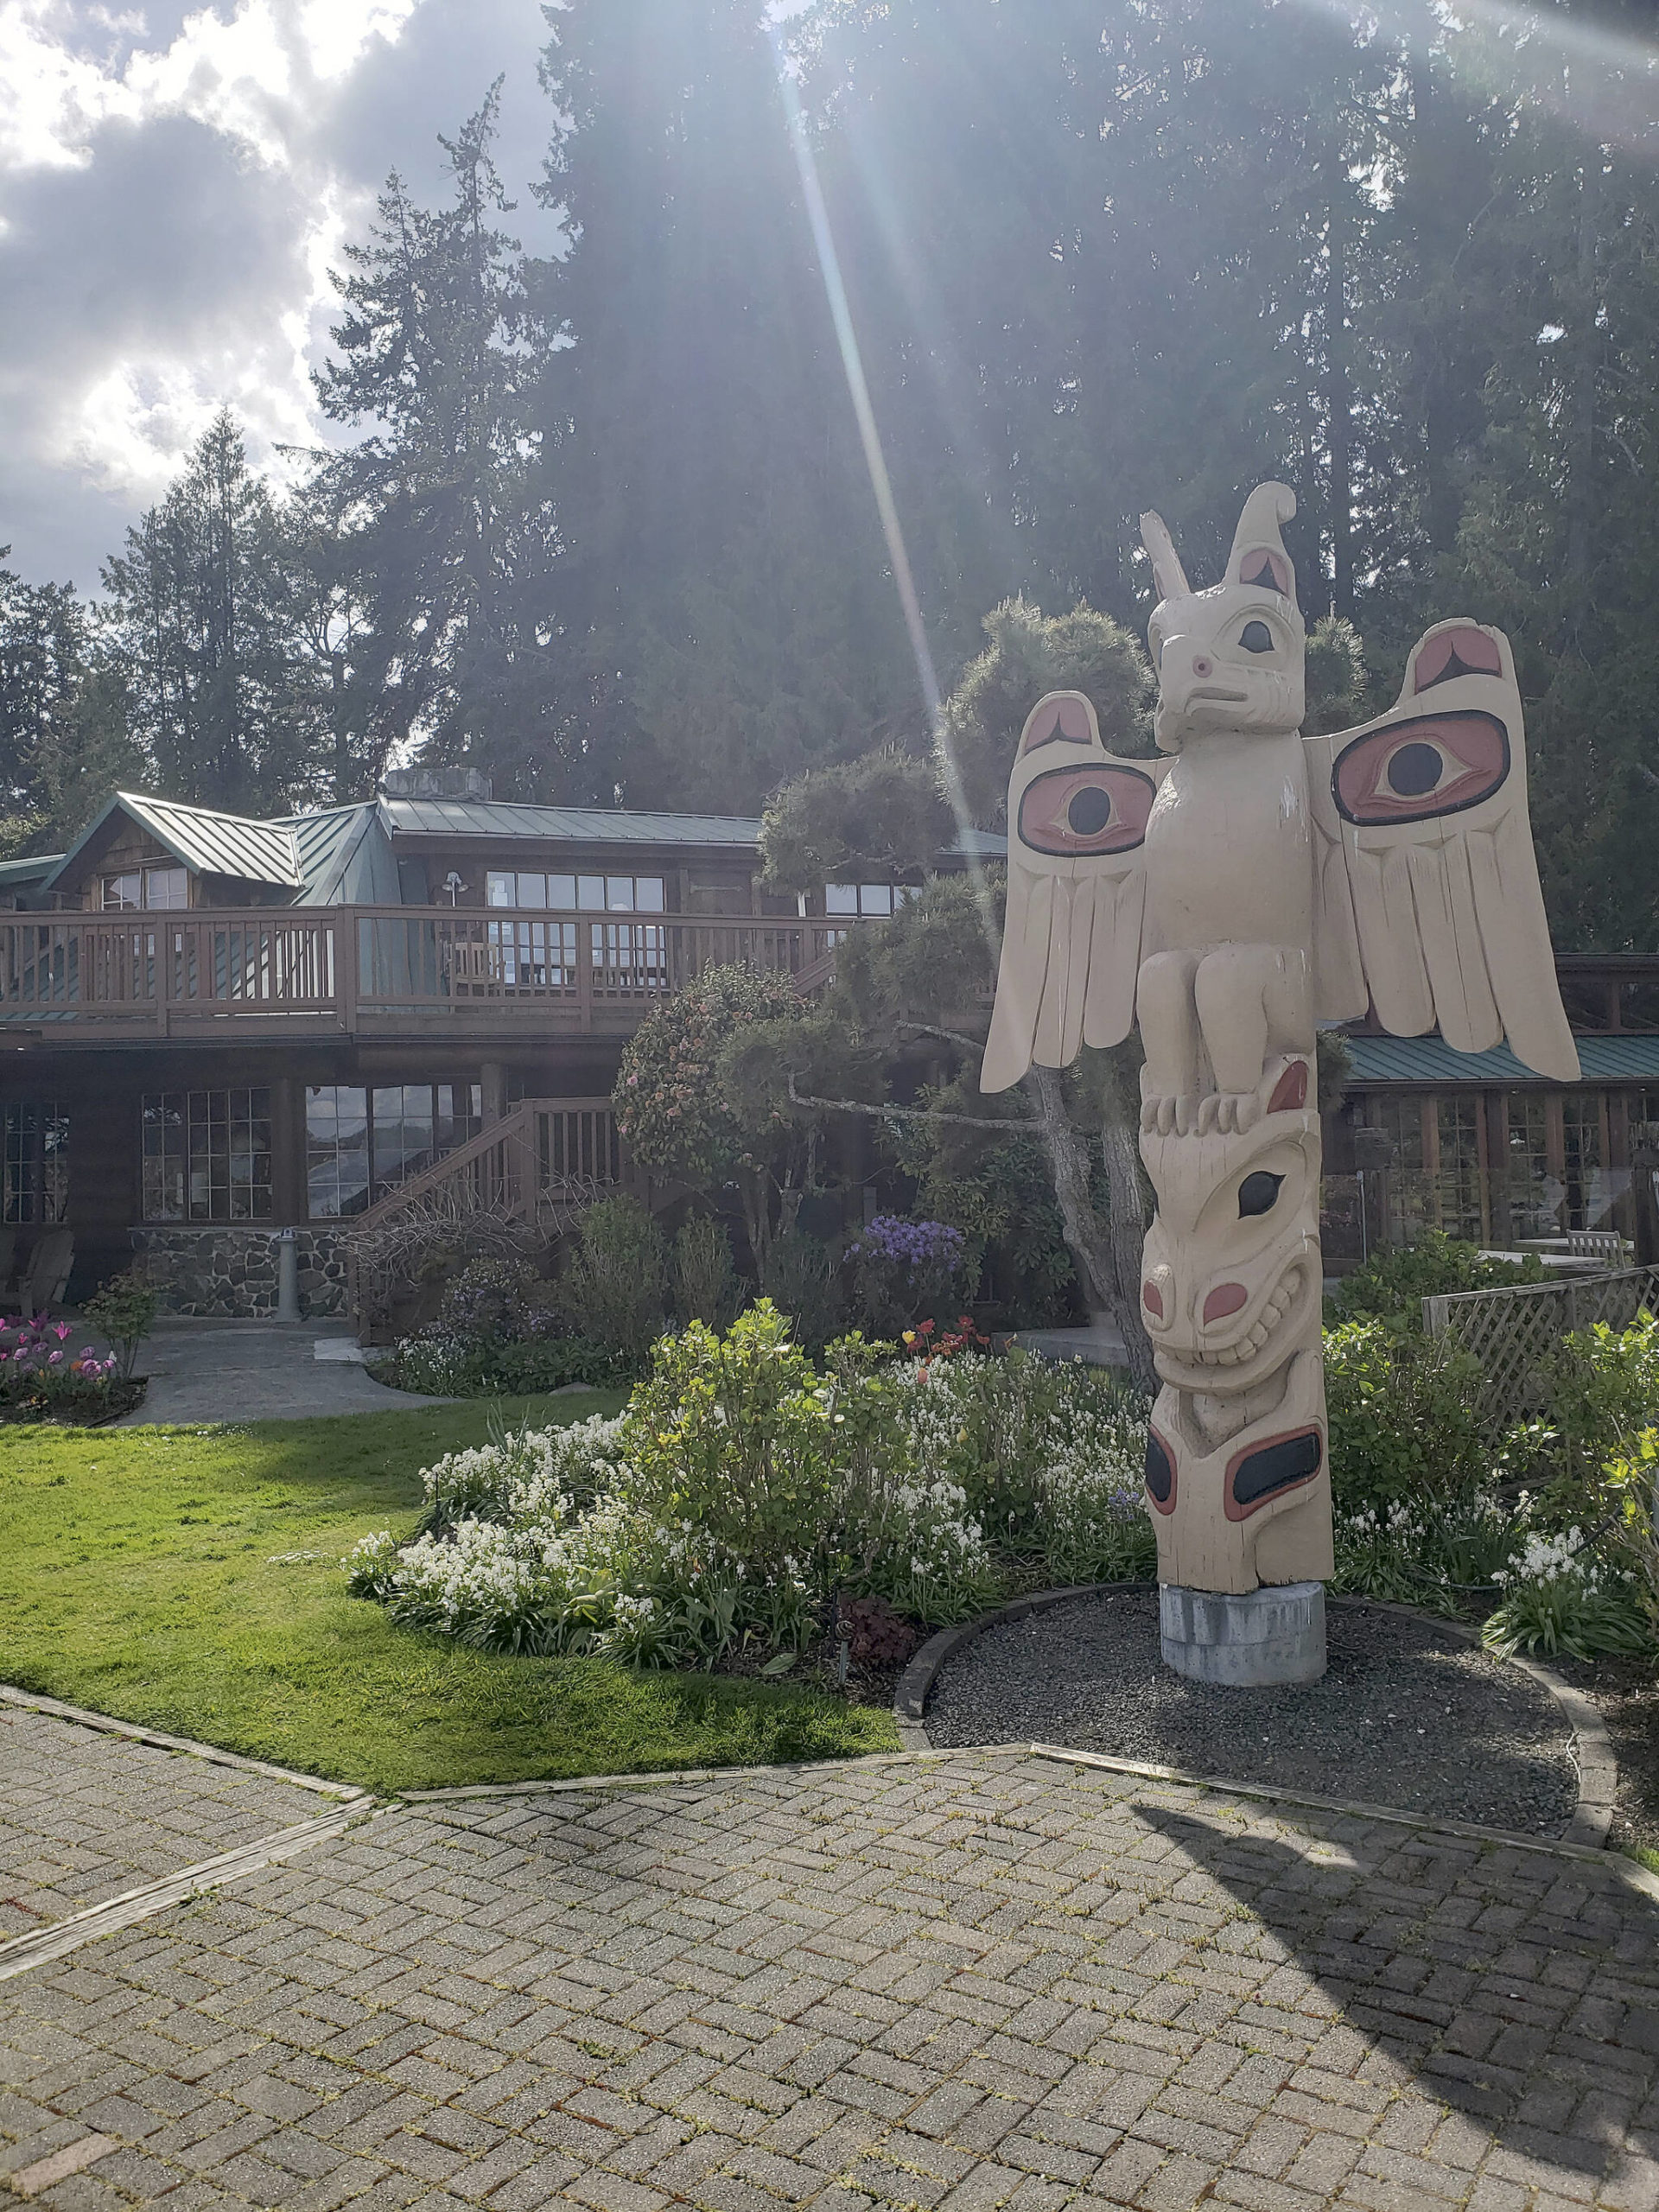 The Suquamish Tribe acquired the lodge in 2004.